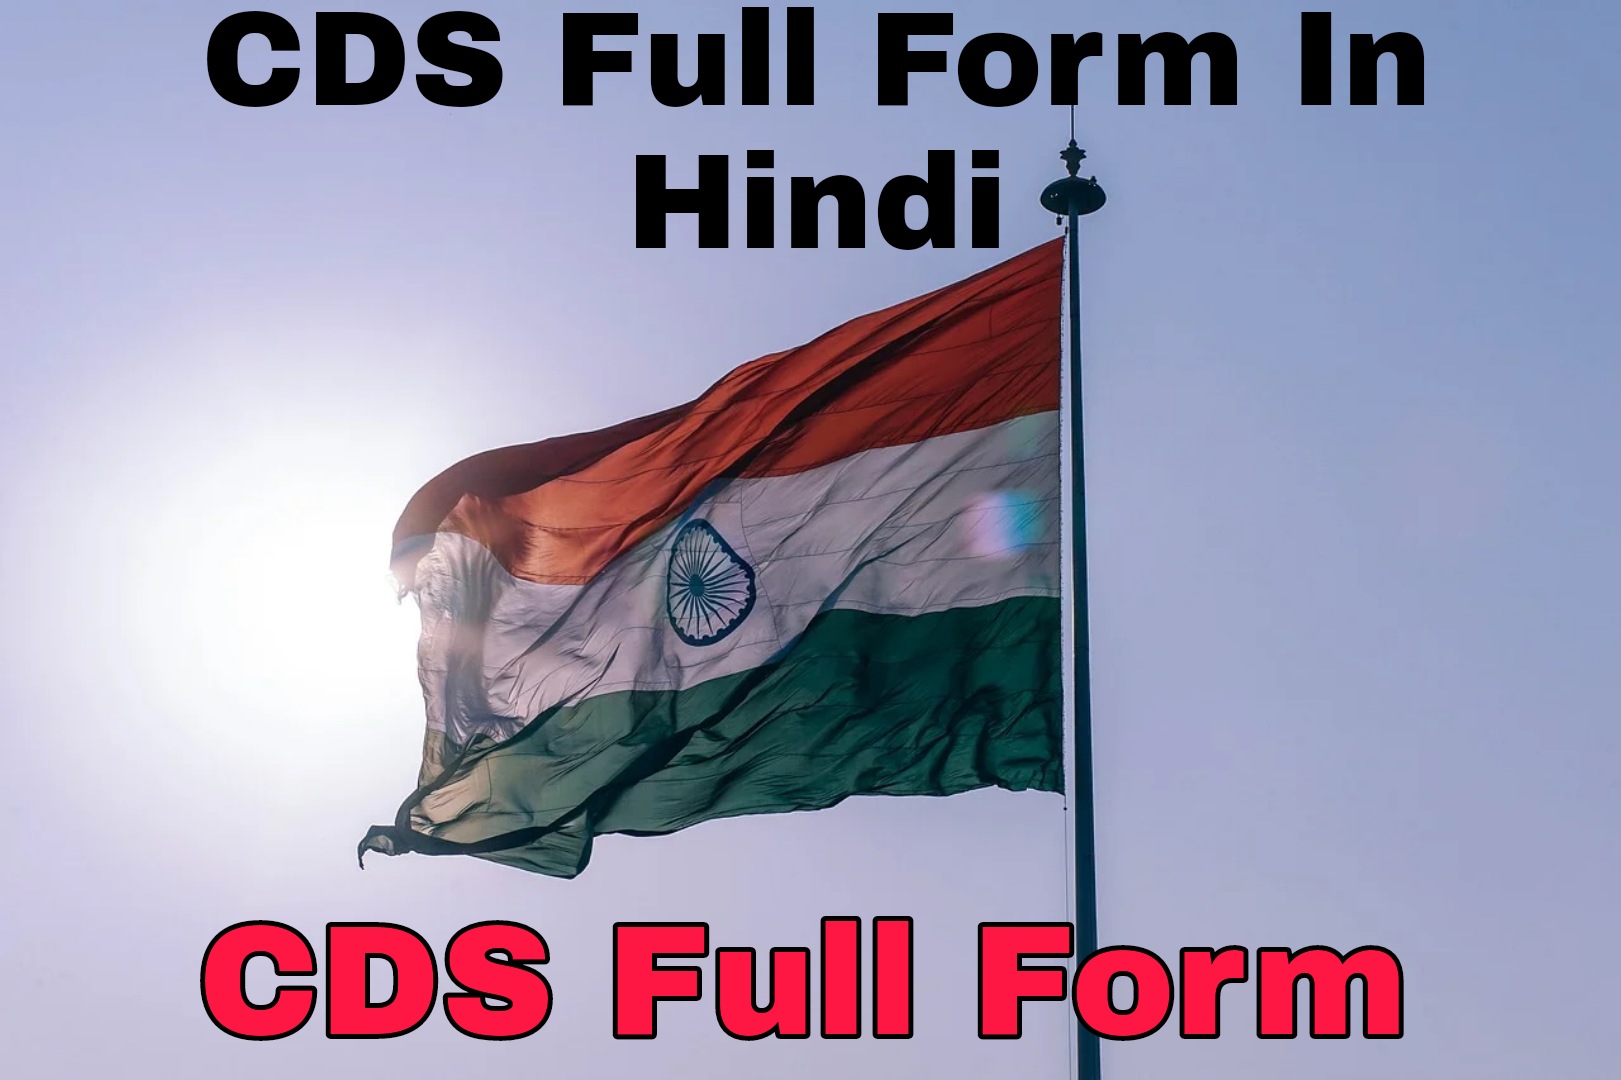 CDS Full Form In Hindi